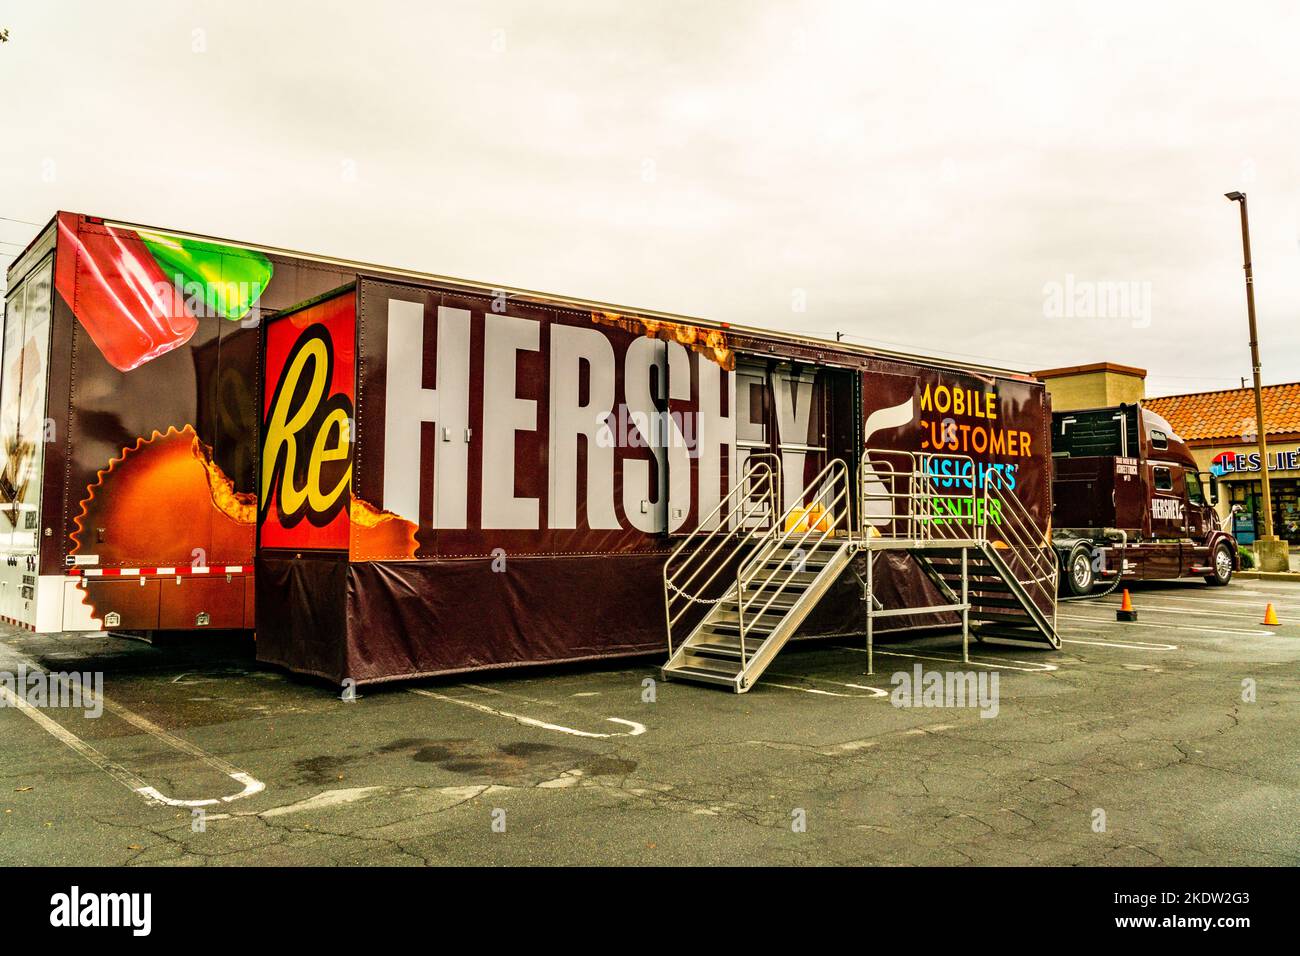 A Hershey's Chocolate mobile Customer Insight Center parked at a shopping center in Modesto California USA Stock Photo